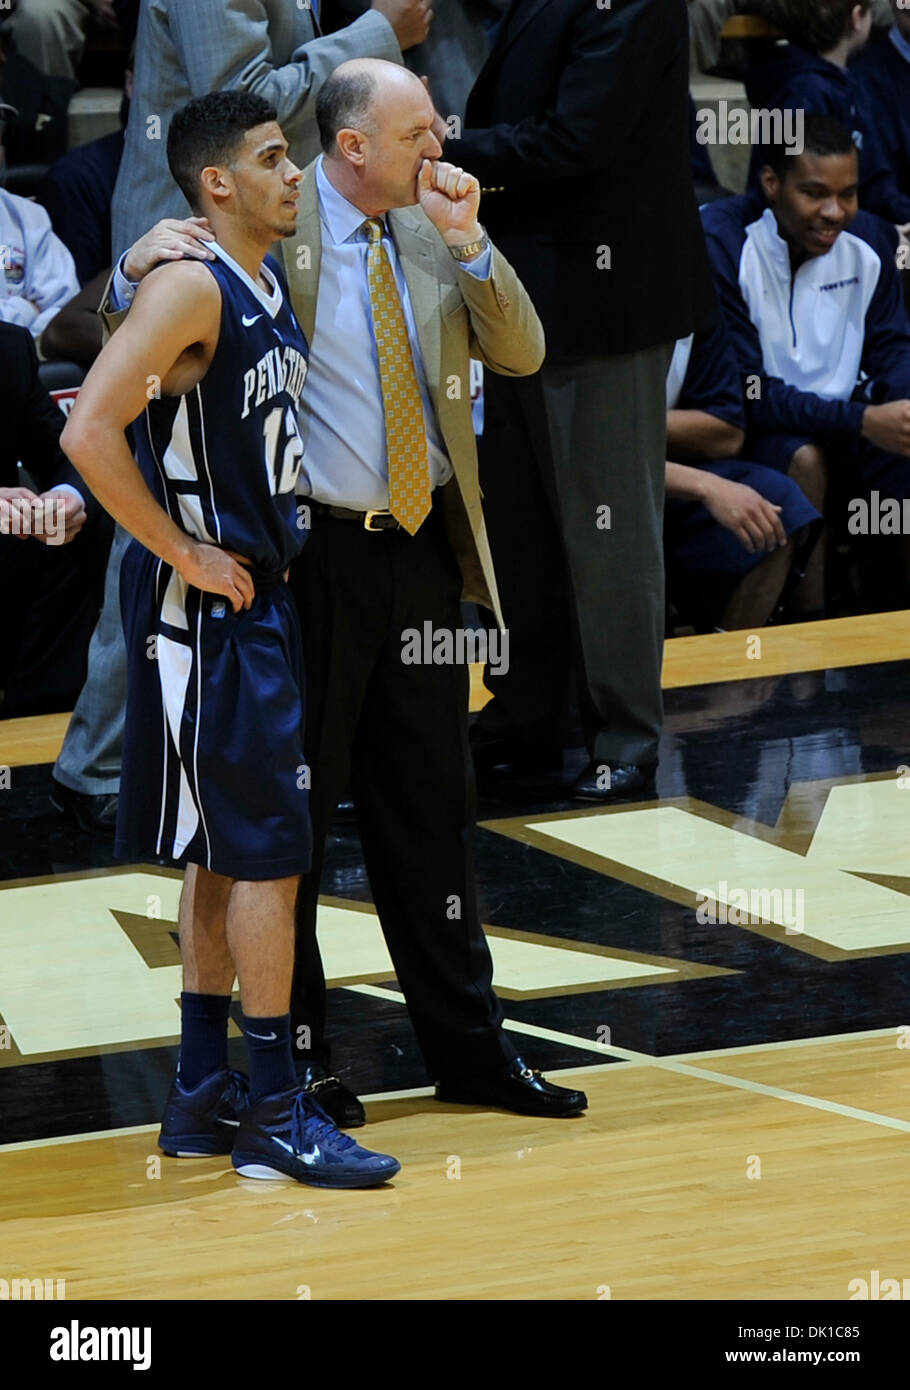 Jan. 20, 2011 - West Lafayette, Indiana, United States of America - Penn State's Sr G Talor Battle (12) stands with Penn State Head Coach Ed DeChellis during the game between Penn State and Purdue at Mackey Arena in West Lafayette. Purdue won the game 63-62. (Credit Image: © Sandra Dukes/Southcreek Global/ZUMAPRESS.com) Stock Photo